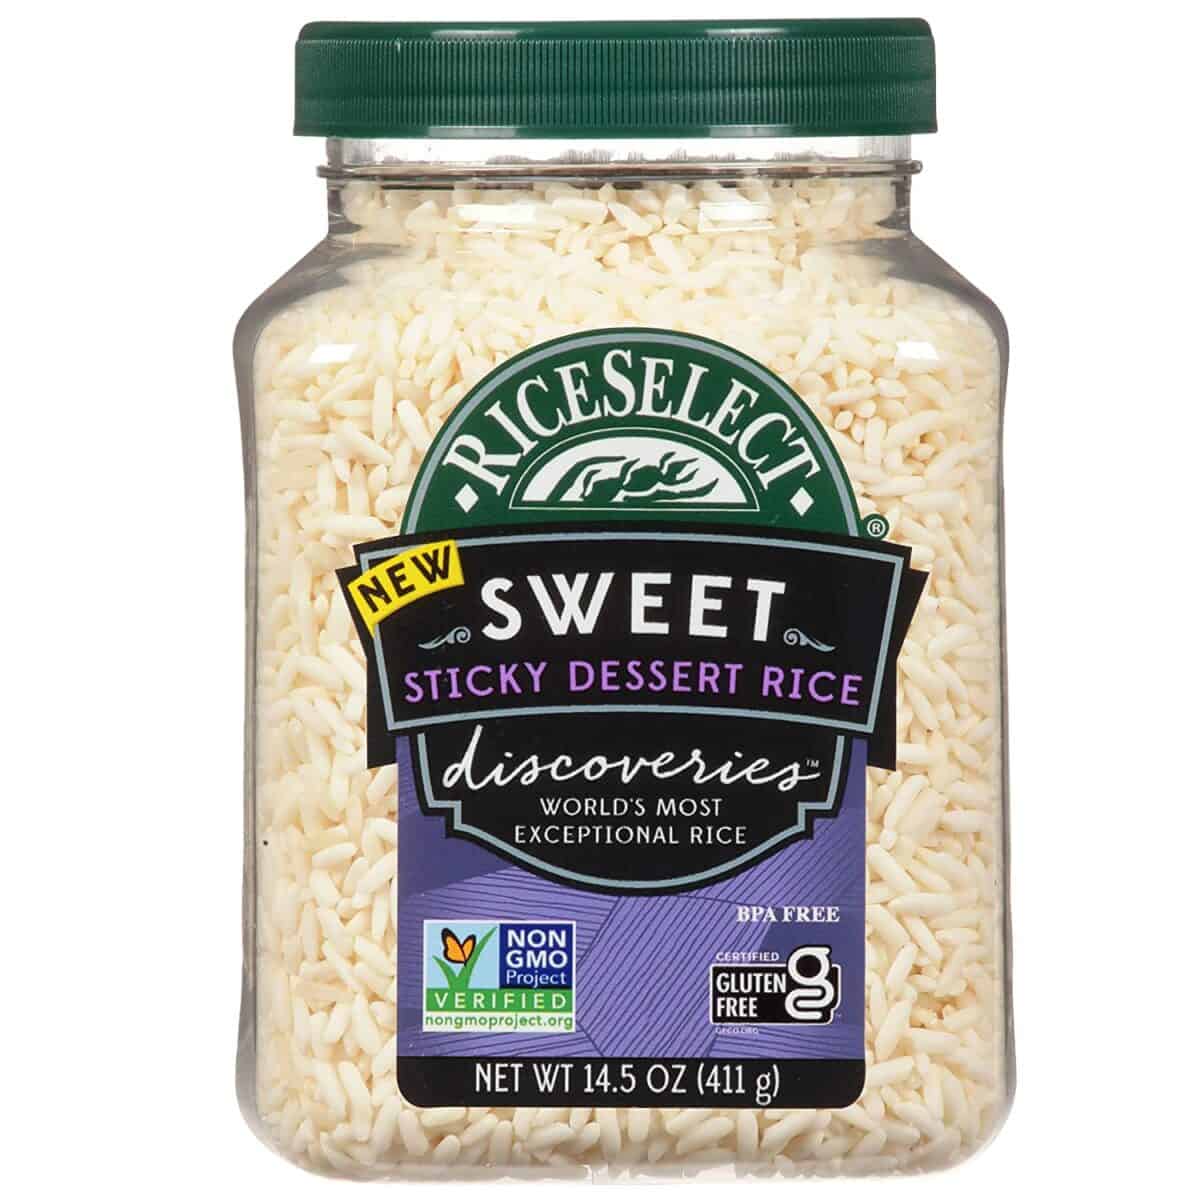 RiceSelect Discoveries Sweet Sticky Dessert Rice, Gluten-Free, Non-GMO, Vegan, 14.5-Ounce Jar, White